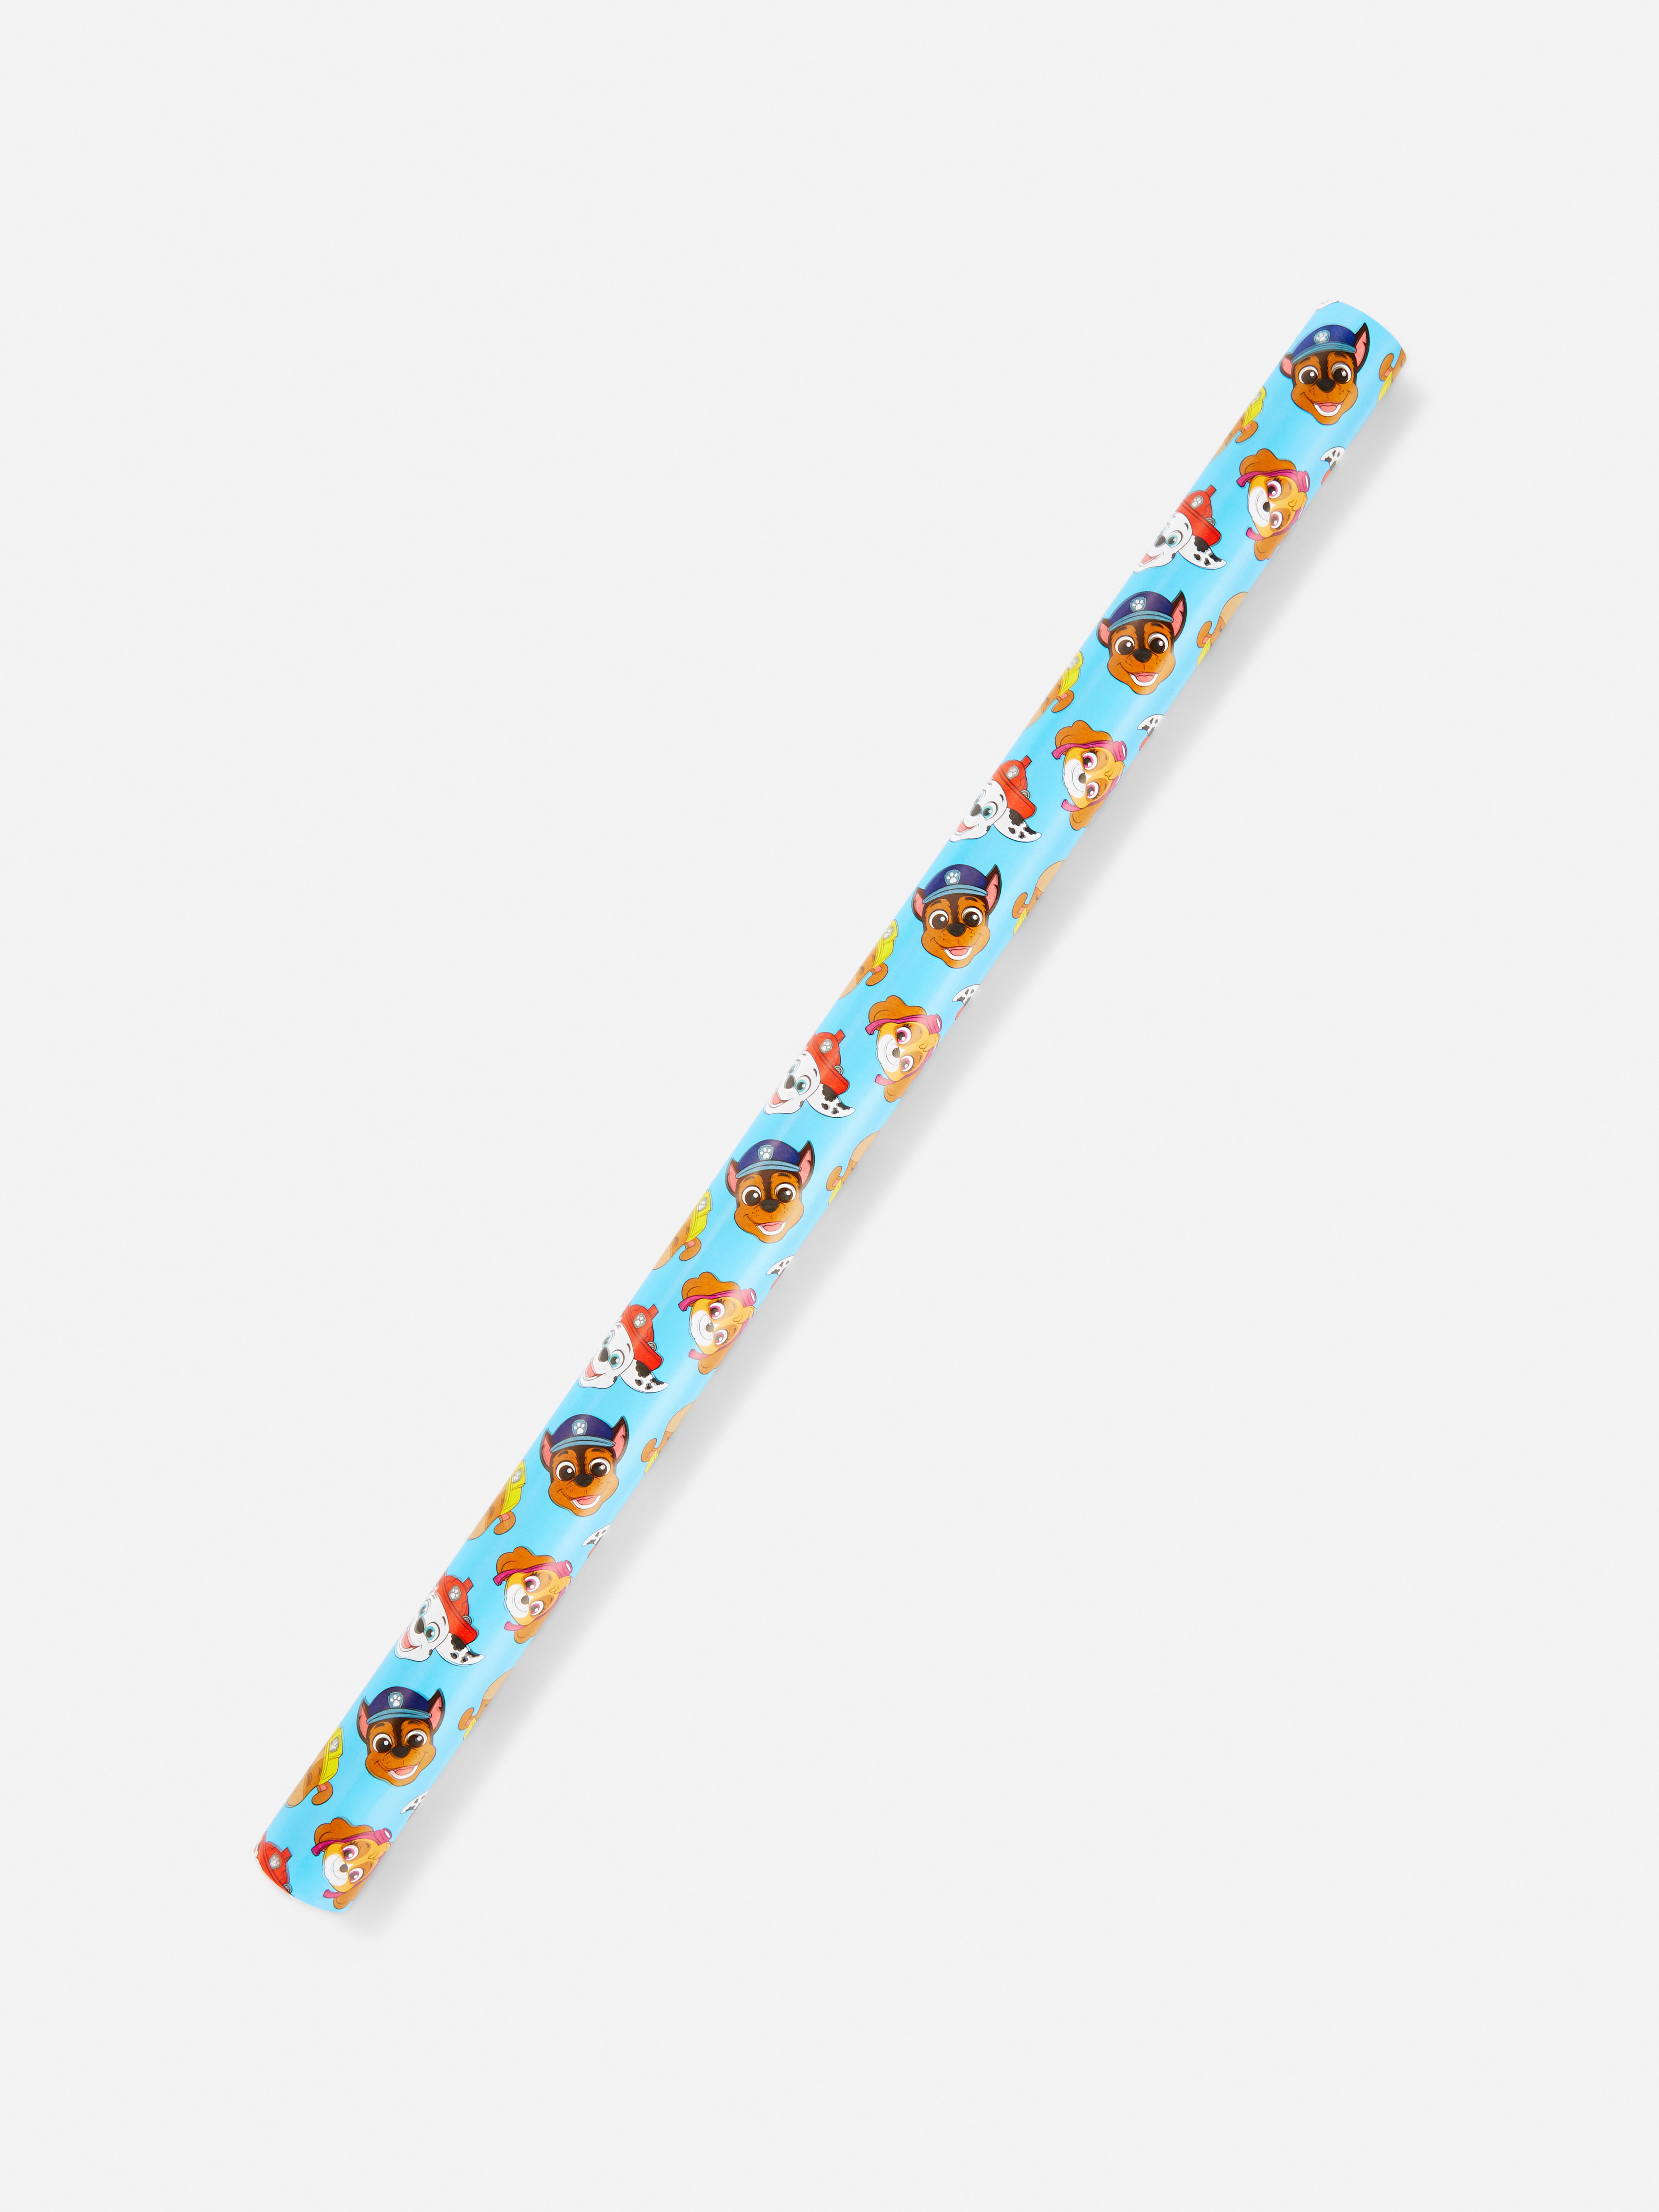 PAW Patrol Printed Wrapping Paper 5m